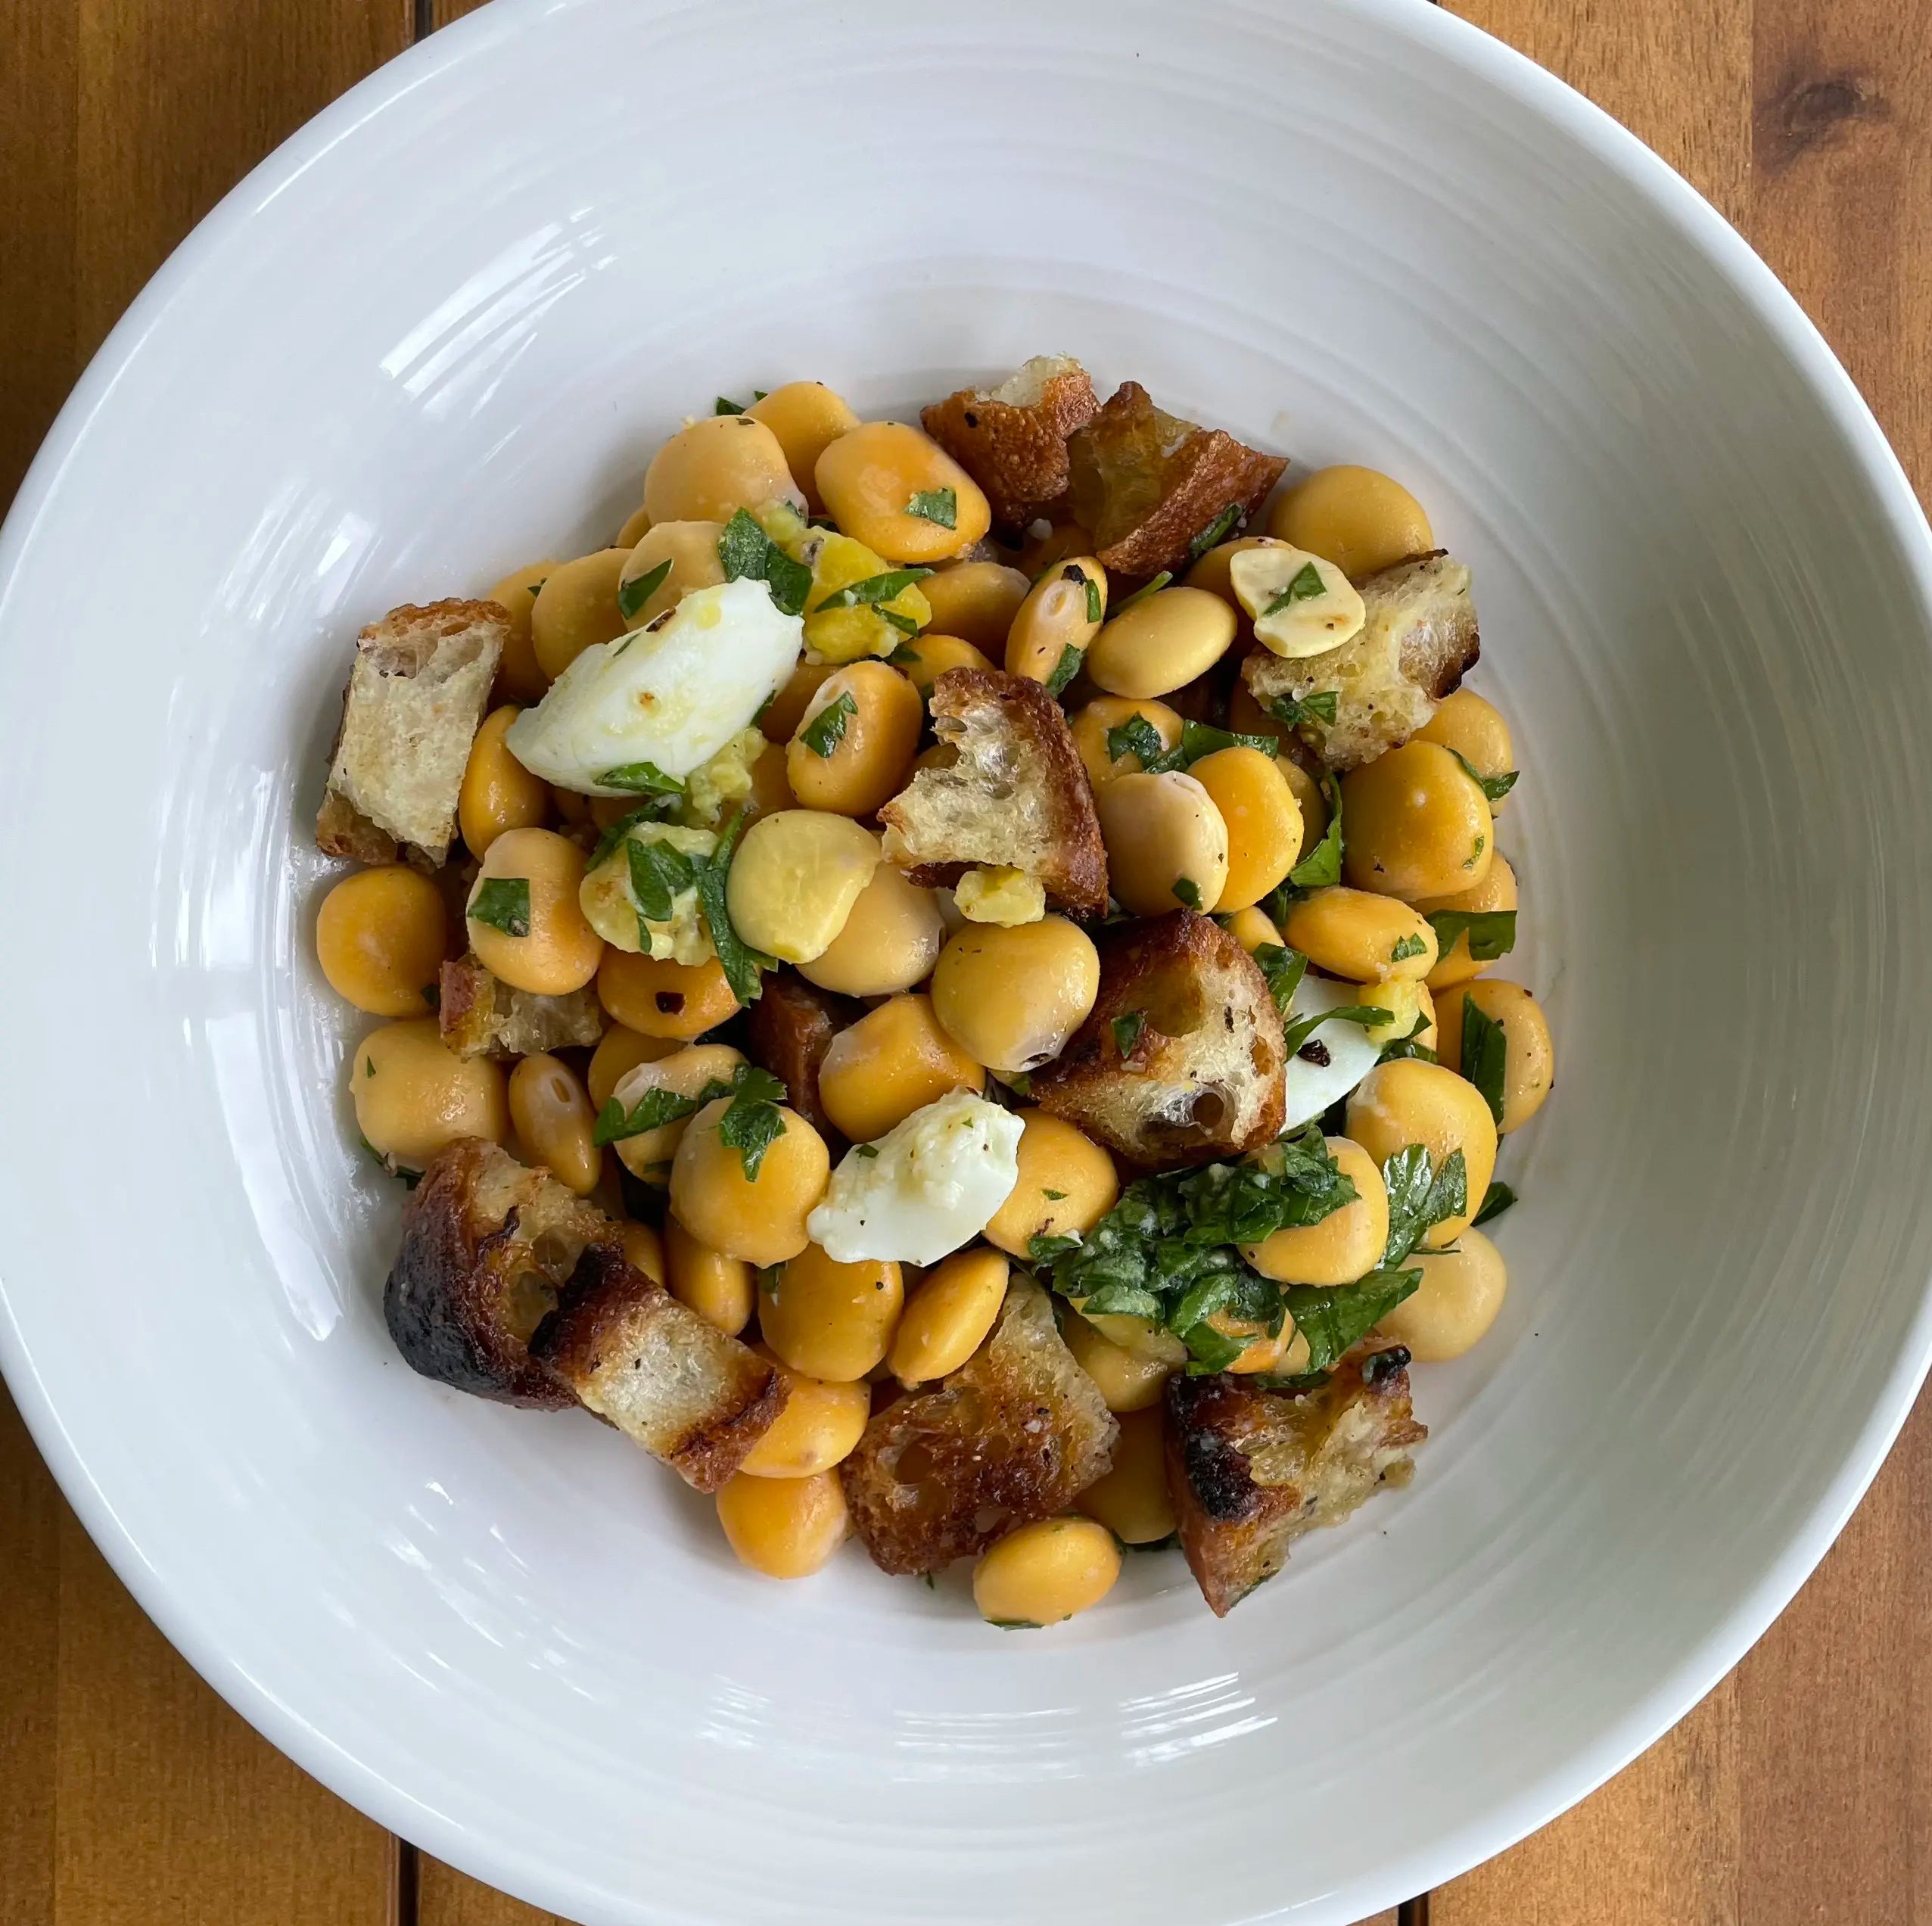 MARK BITTMAN'S LUPINI WITH EGGS AND CROUTONS